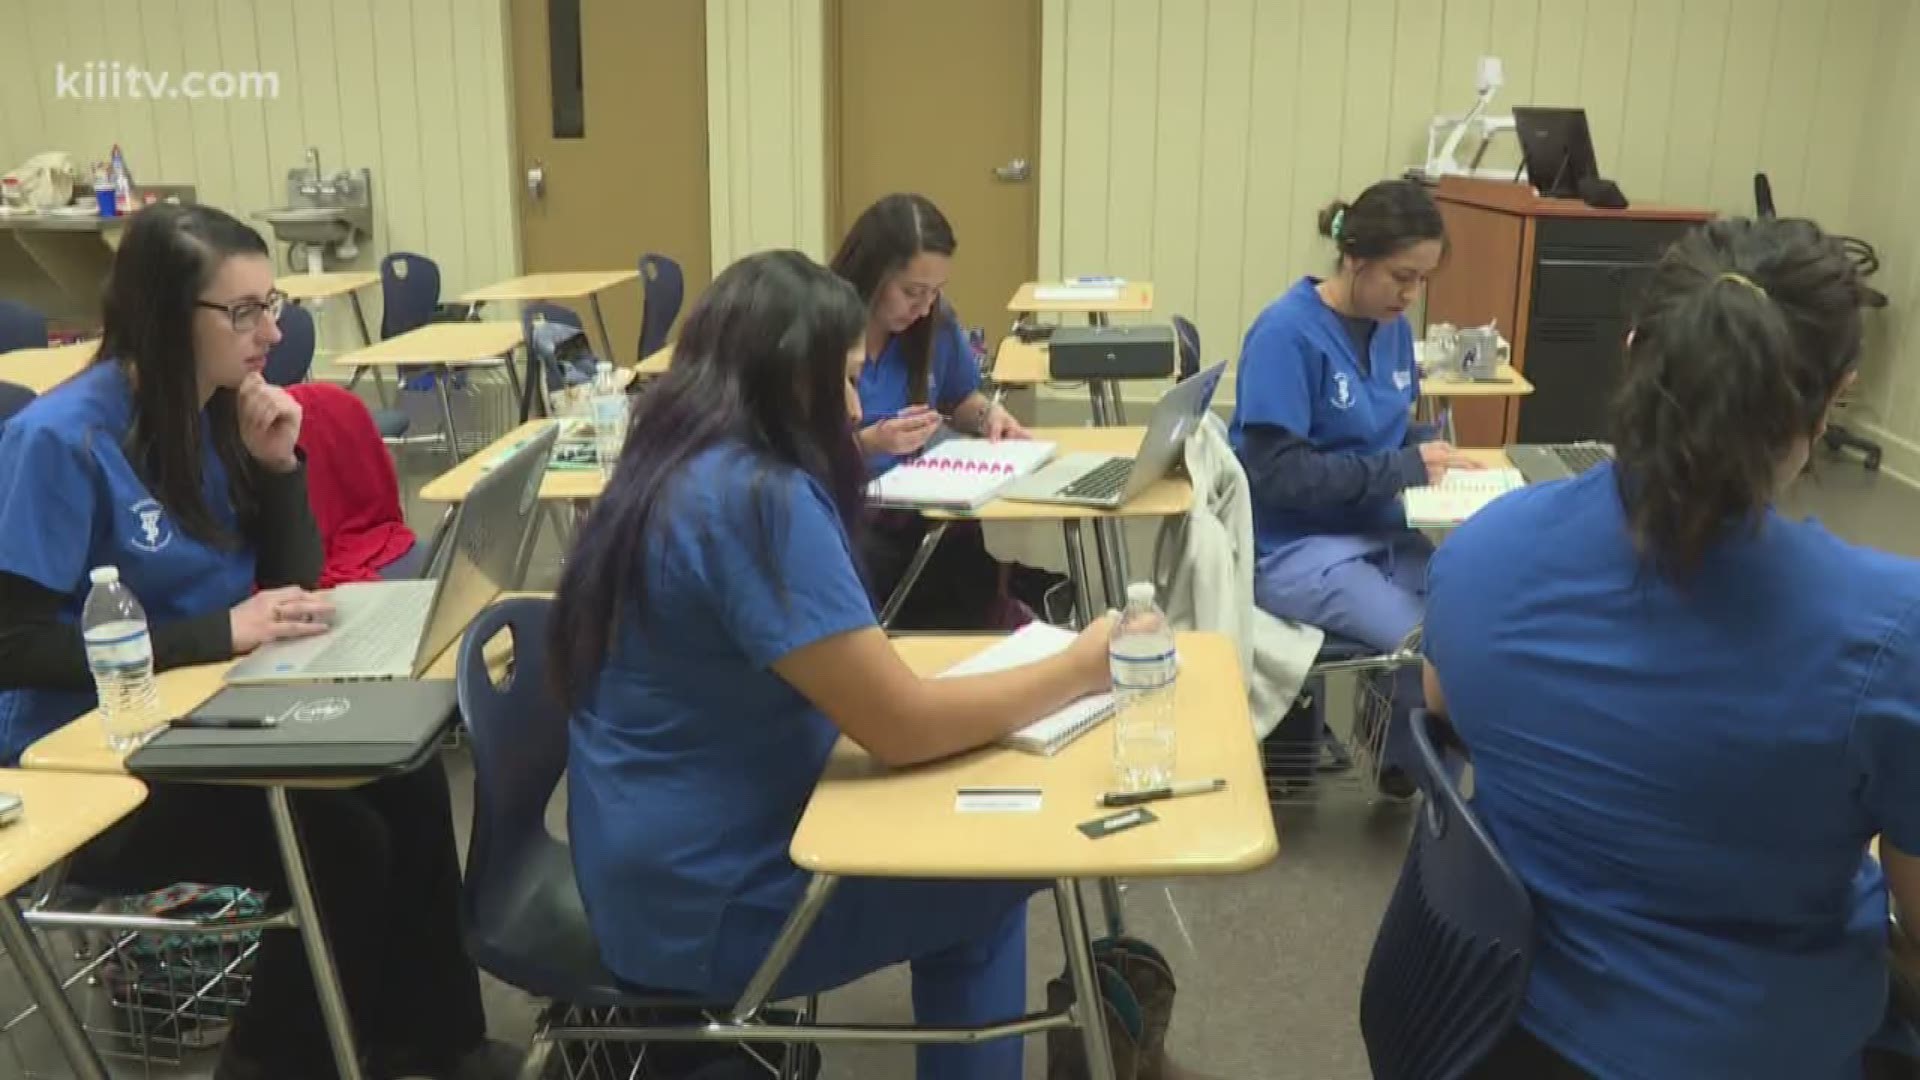 Some students at Texas A&M University-Kingsville are hoping to become veterinary technicians, and they received some great news on Monday.